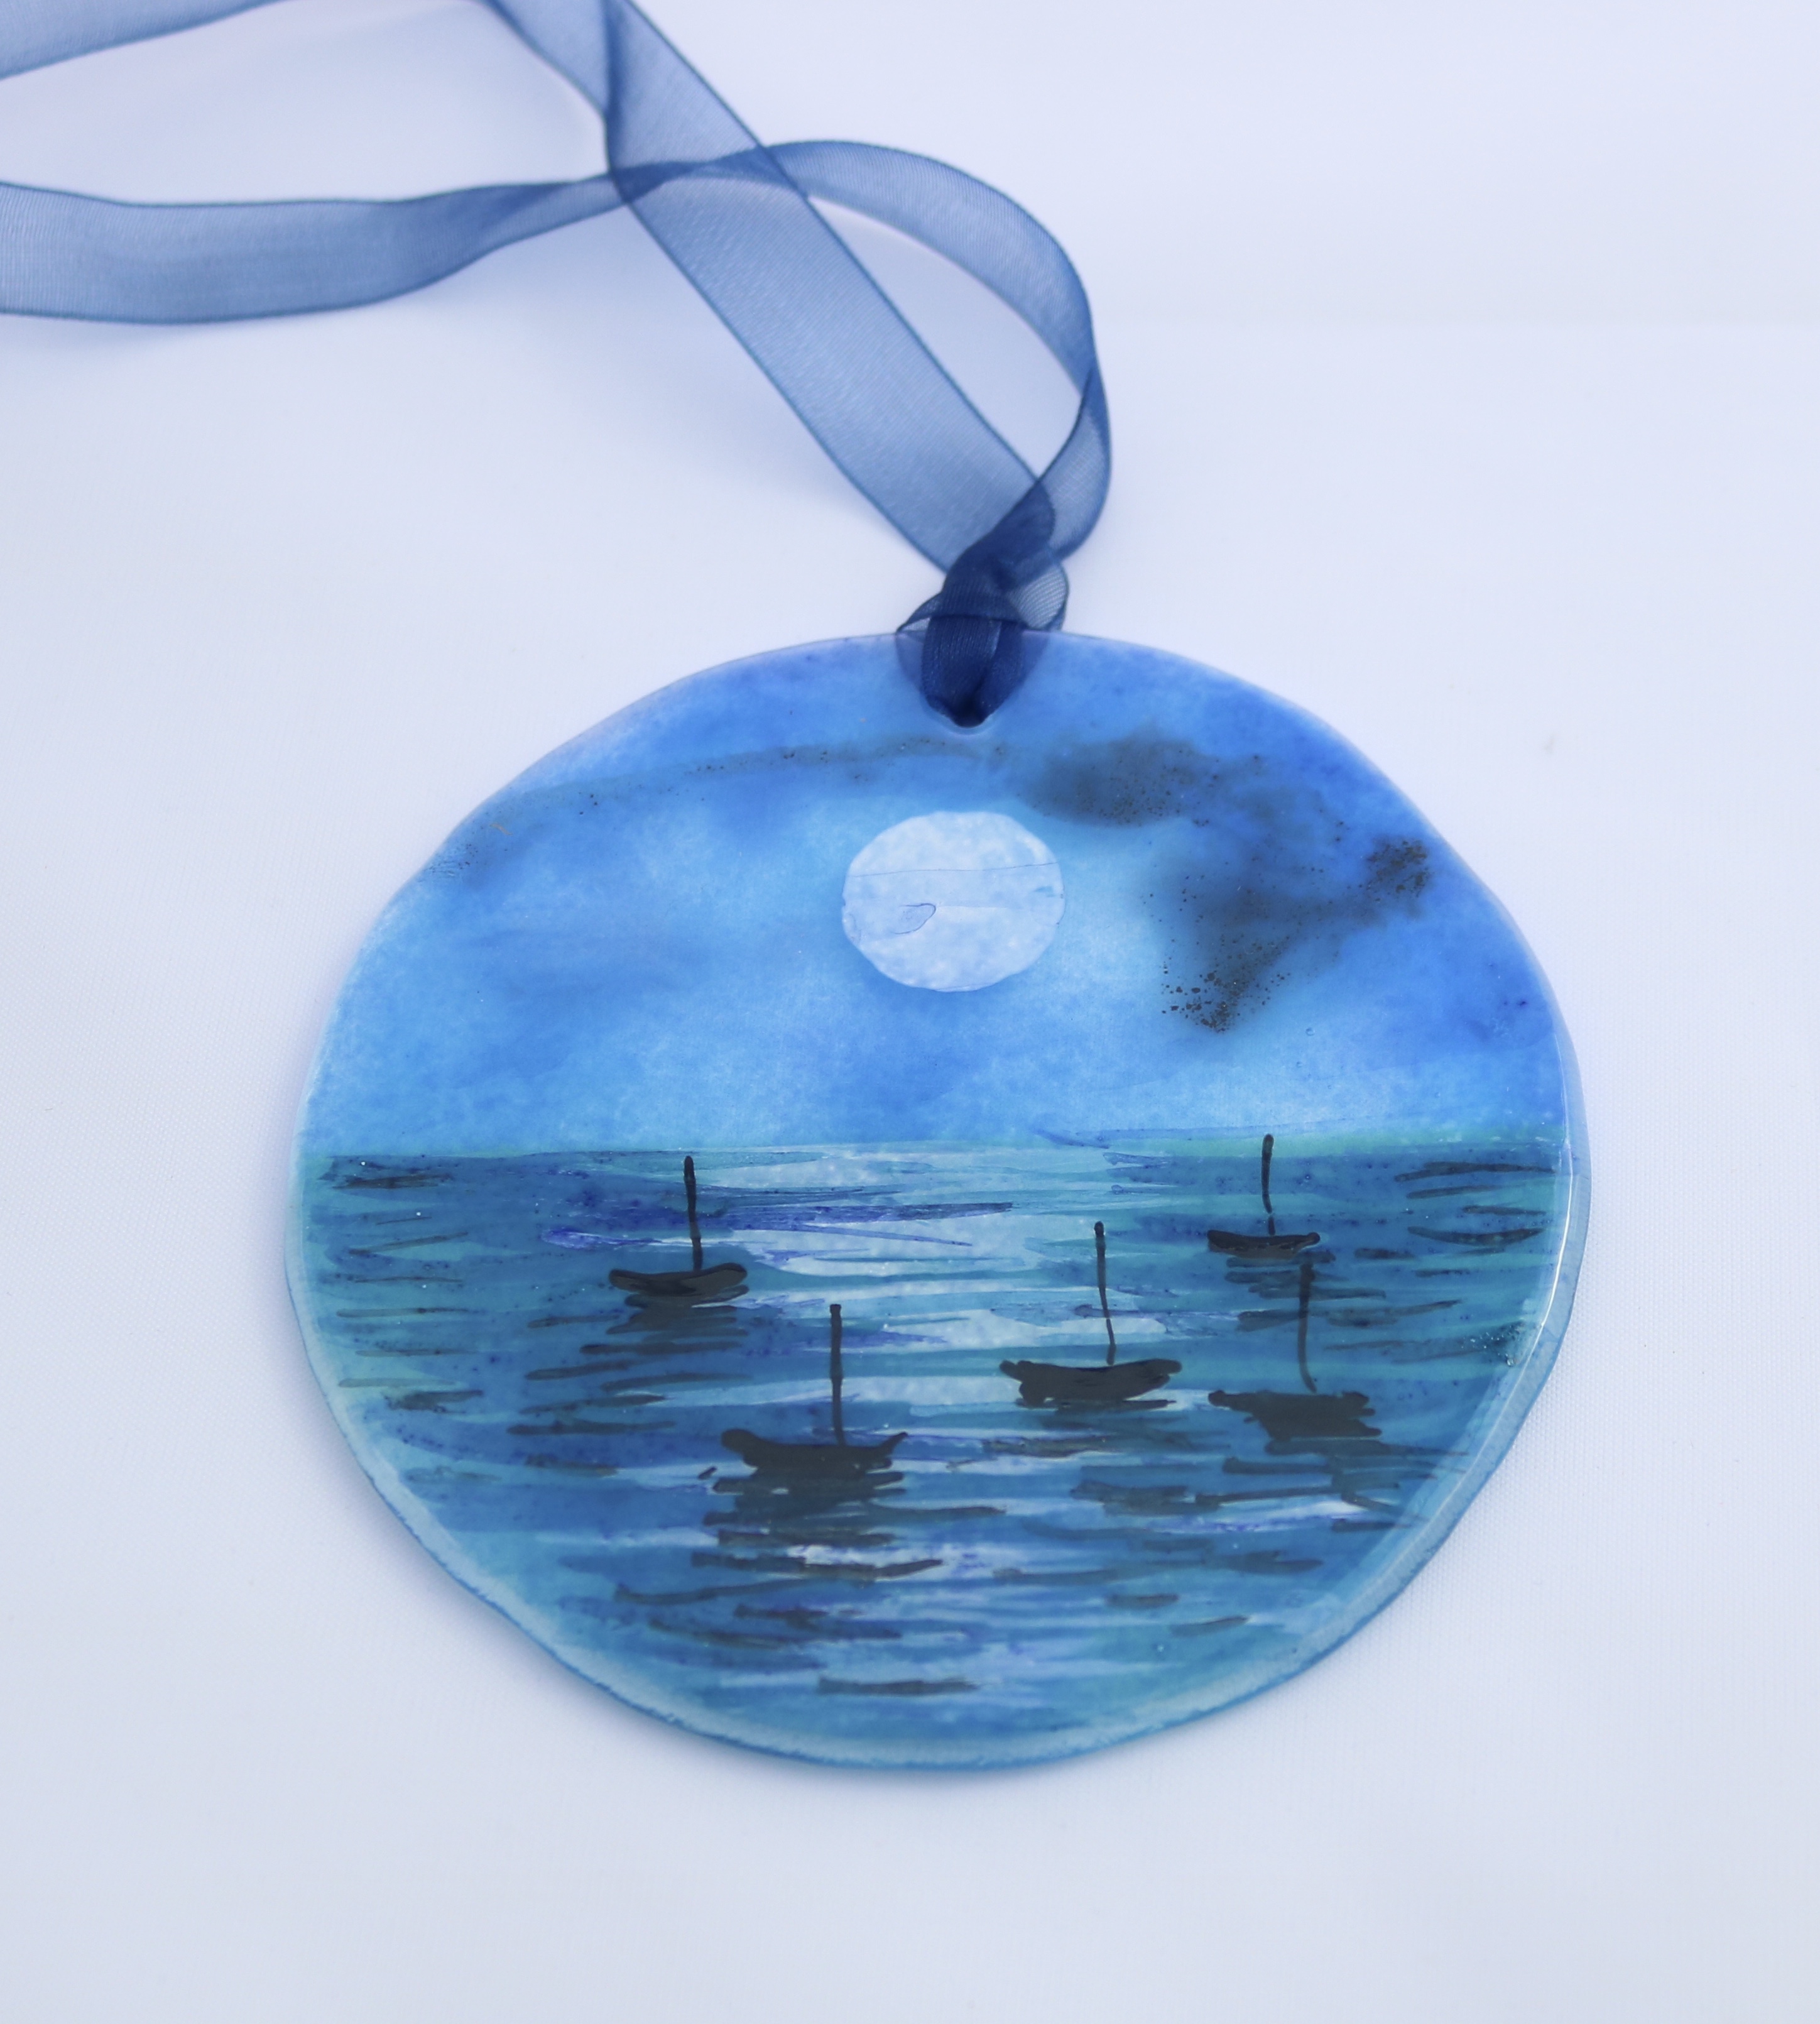 Handpainted seascape with moonlight and tiny silhouettes boats on glass